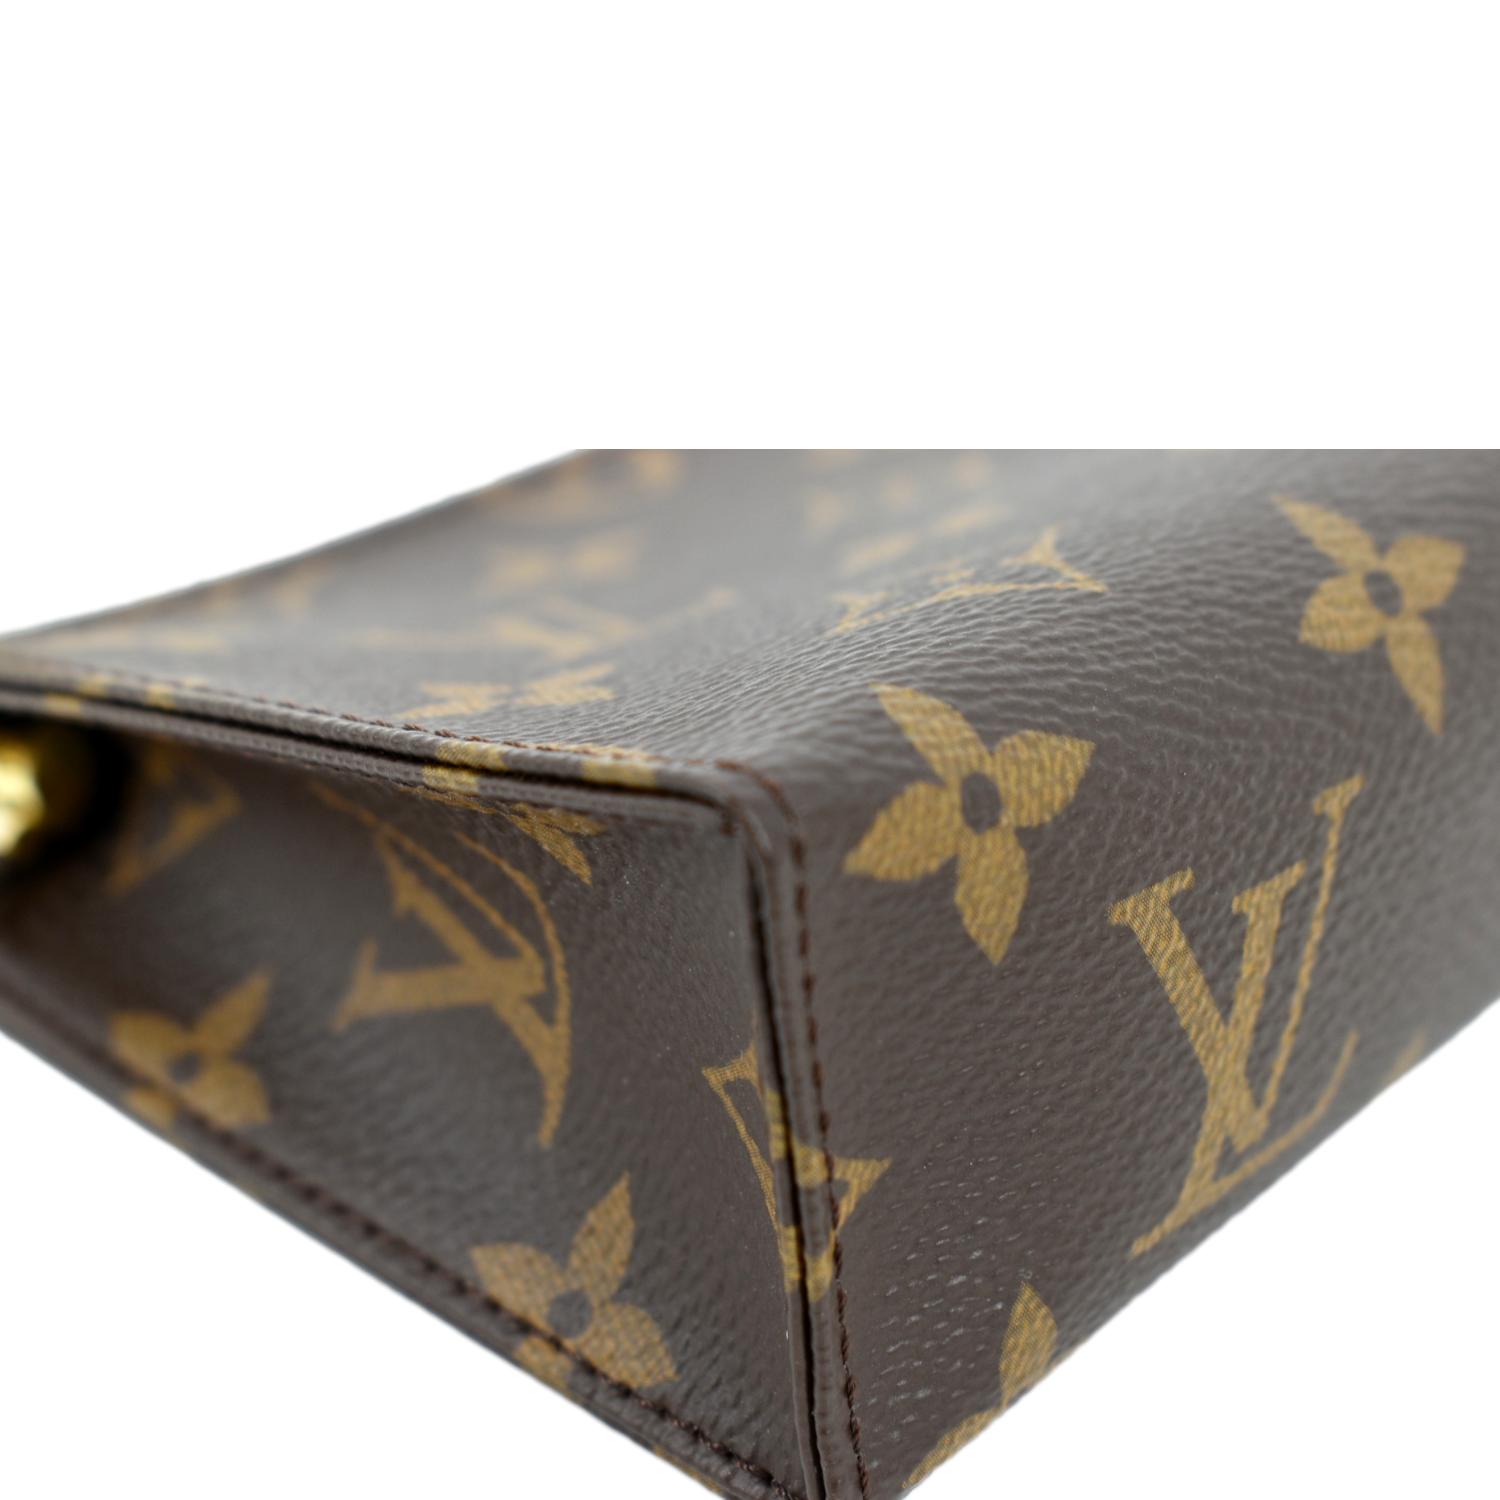 Louis Vuitton Monogram Toiletry Pouch 15 - Brown Cosmetic Bags, Accessories  - LOU794198